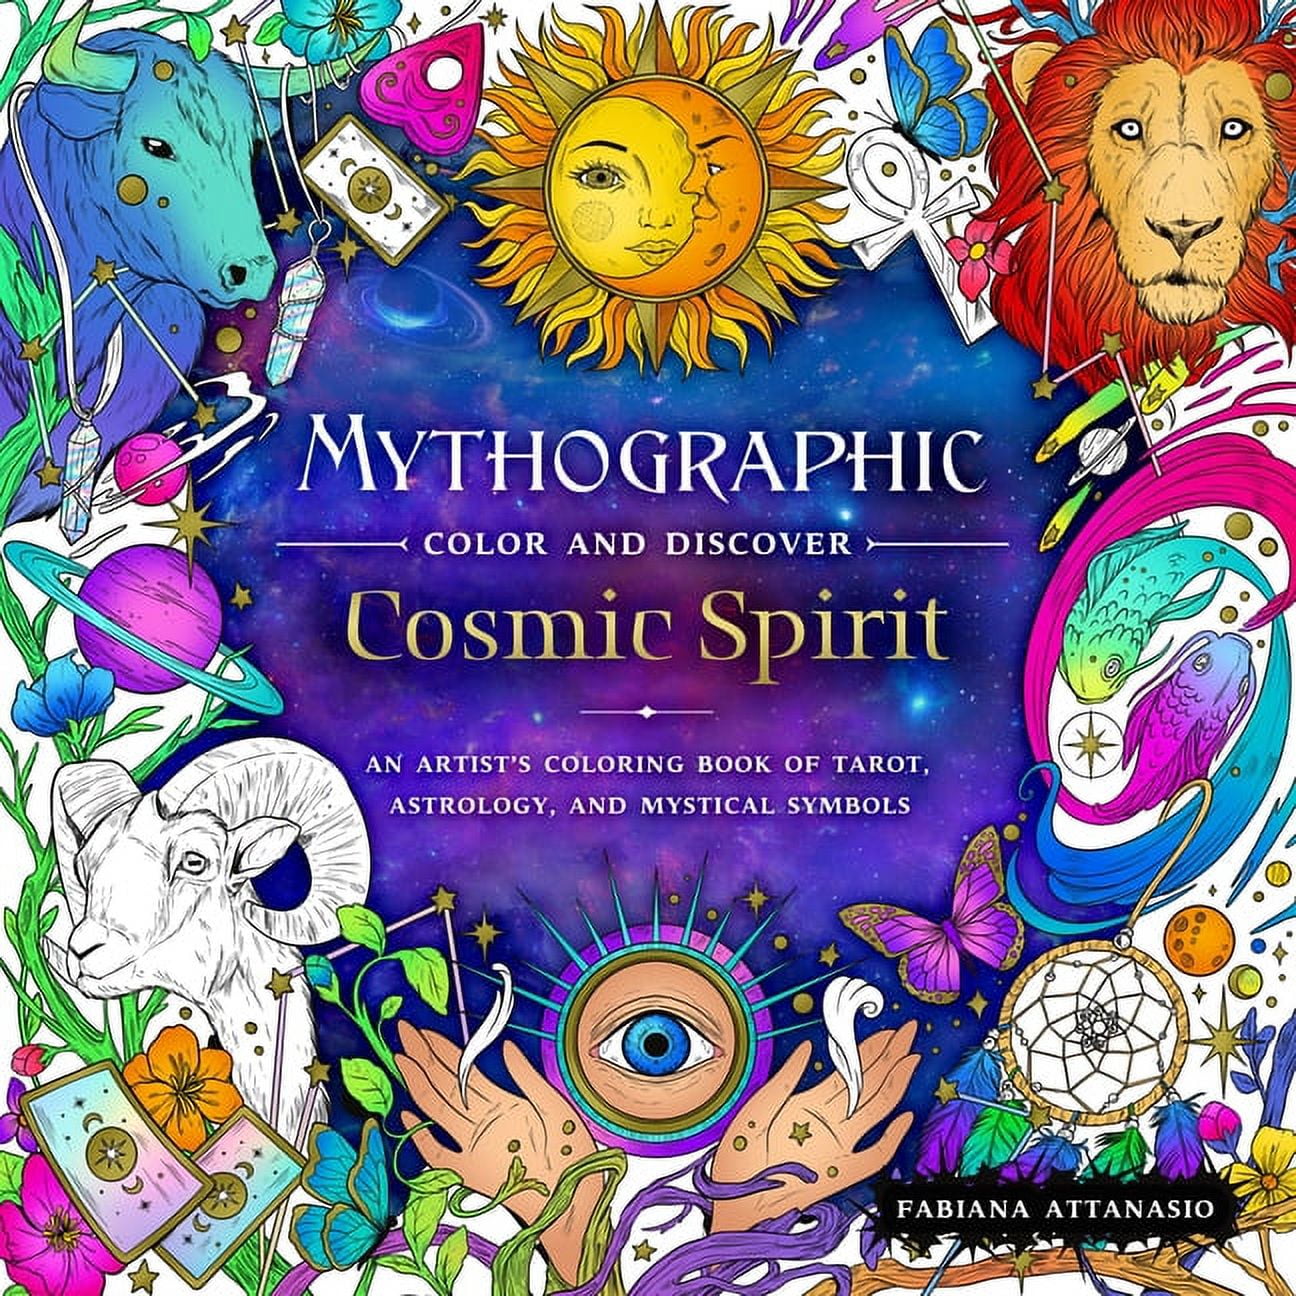 12 Mythographic/animals ideas  coloring books, adult coloring inspiration, adult  coloring